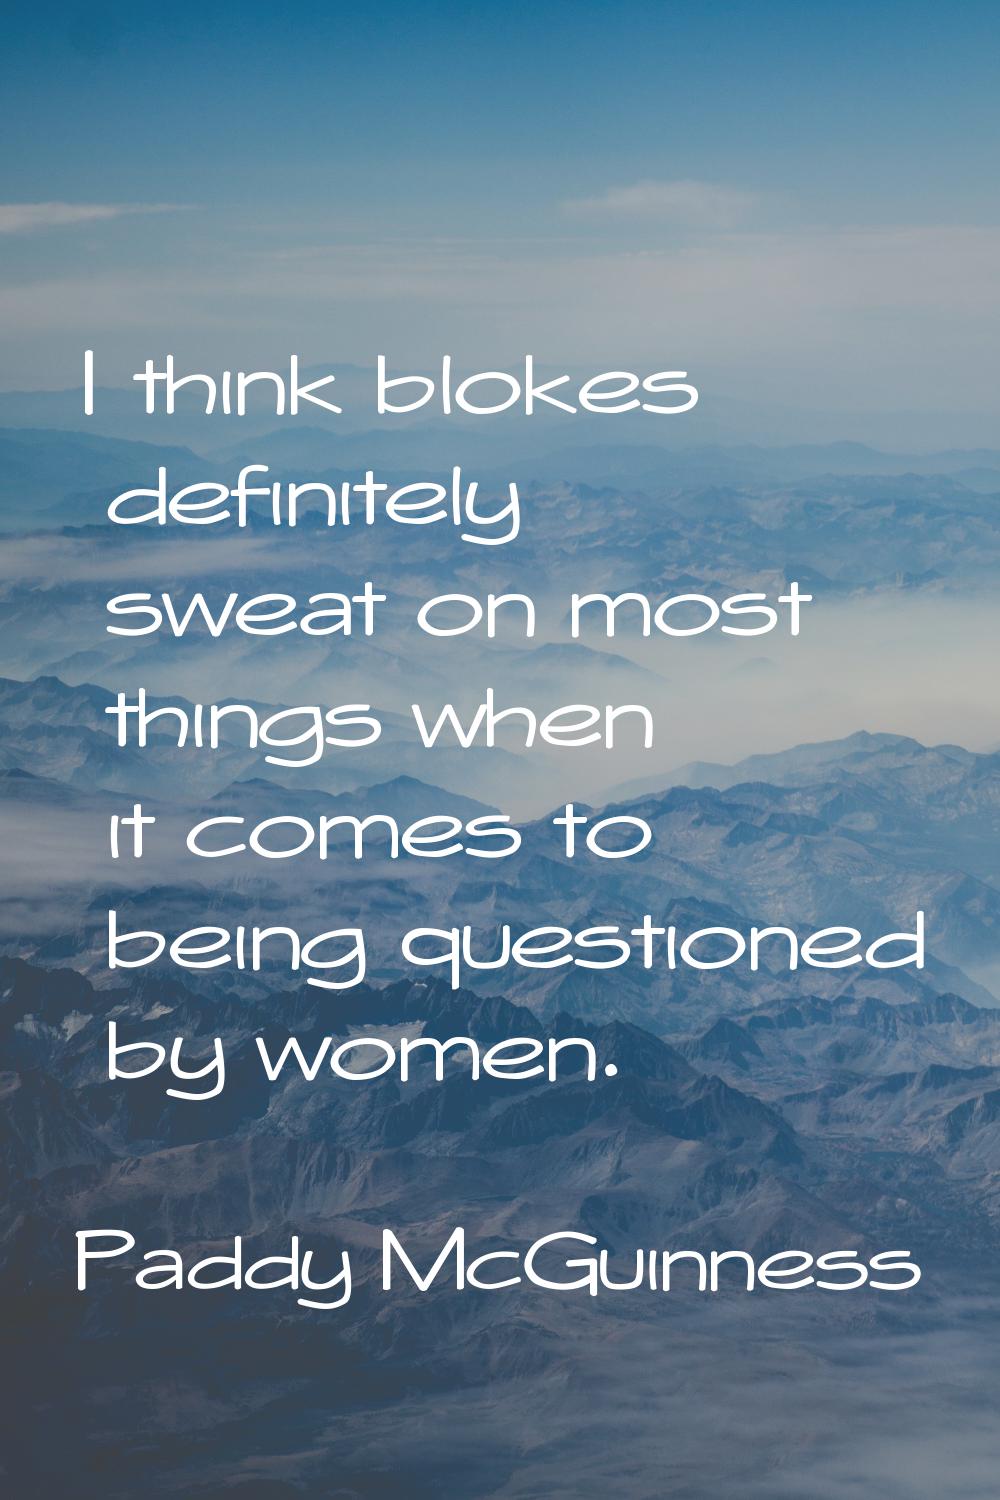 I think blokes definitely sweat on most things when it comes to being questioned by women.